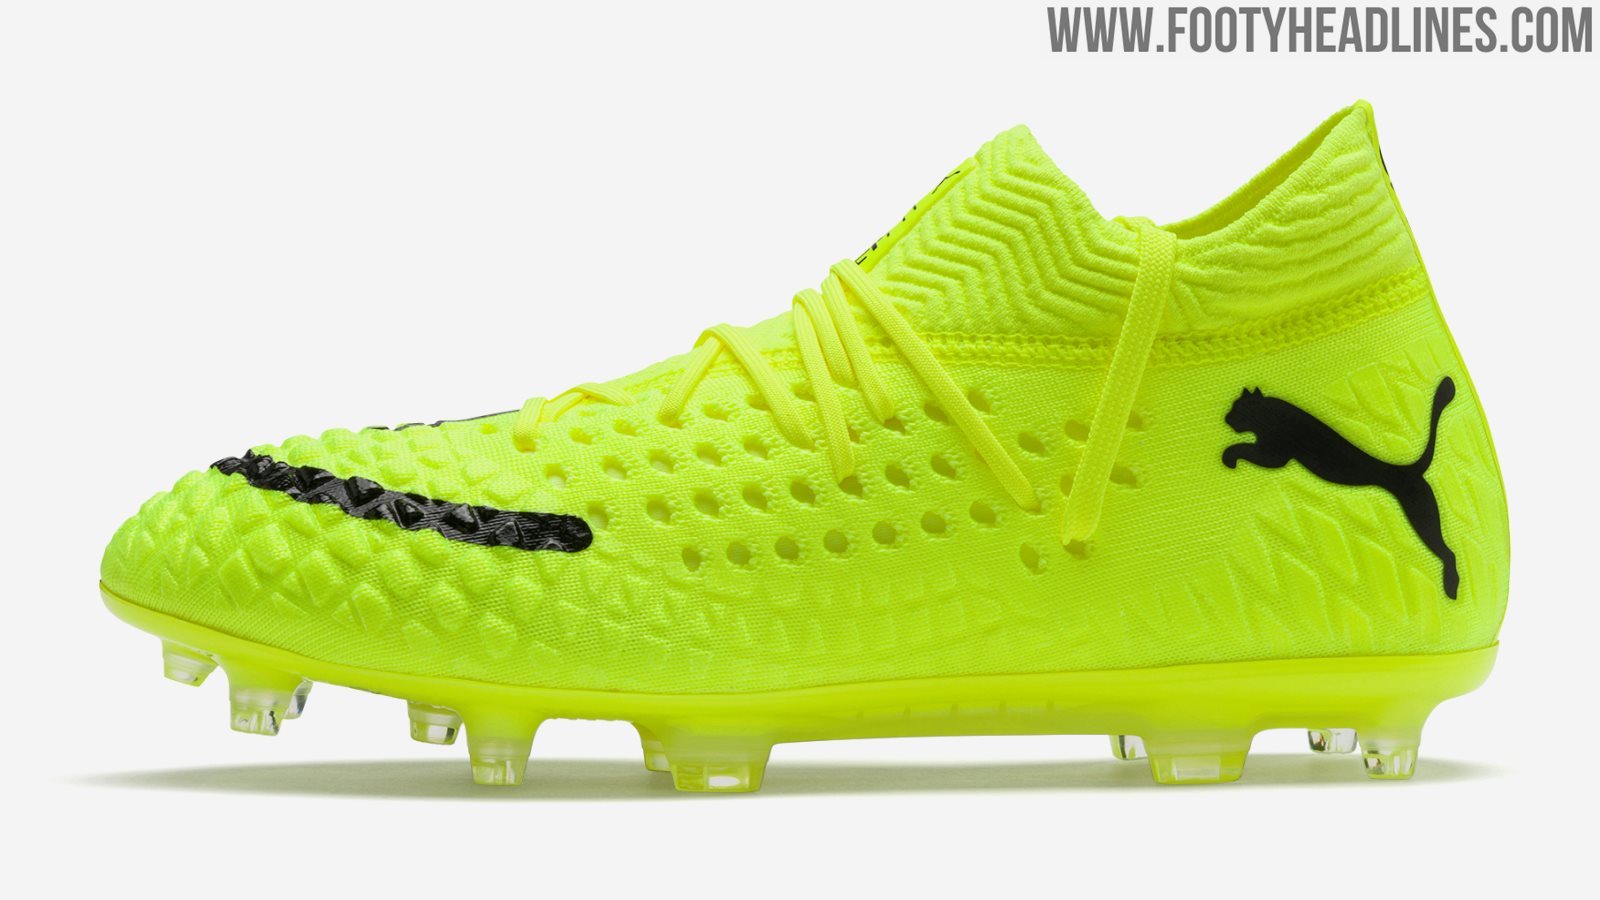 Limited-Edition Puma Future "Grizi 10 Year Boots Released - Footy Headlines